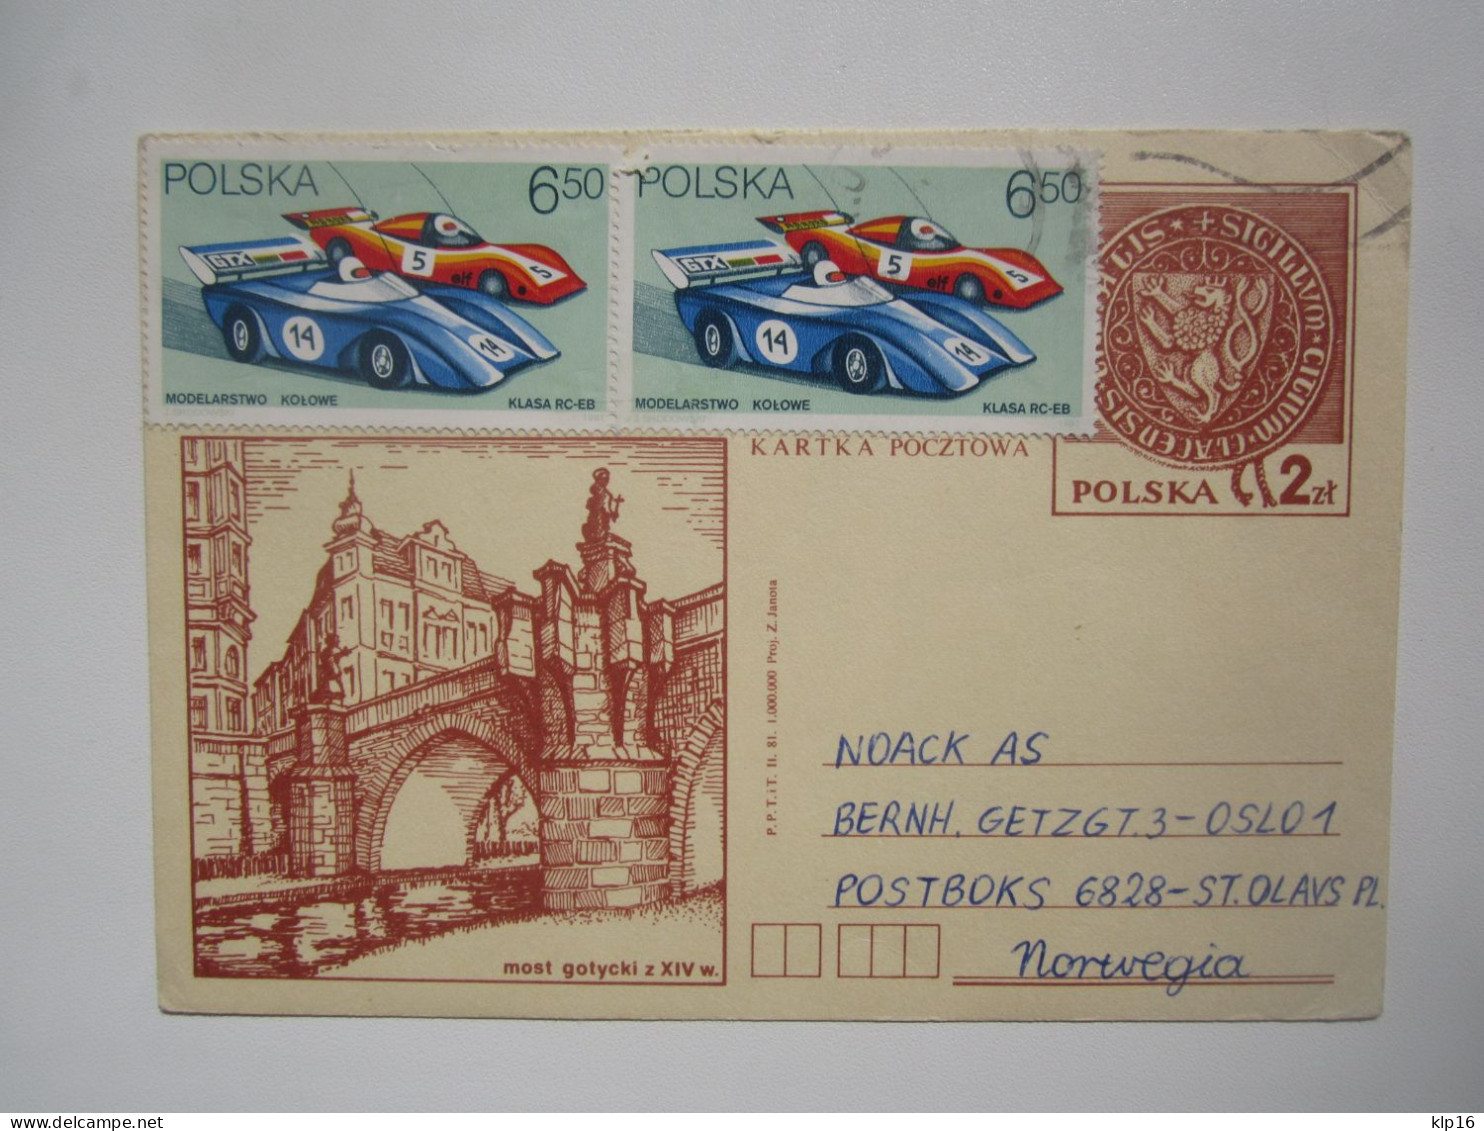 POLAND POSTAL CARD To NORWAY - Covers & Documents